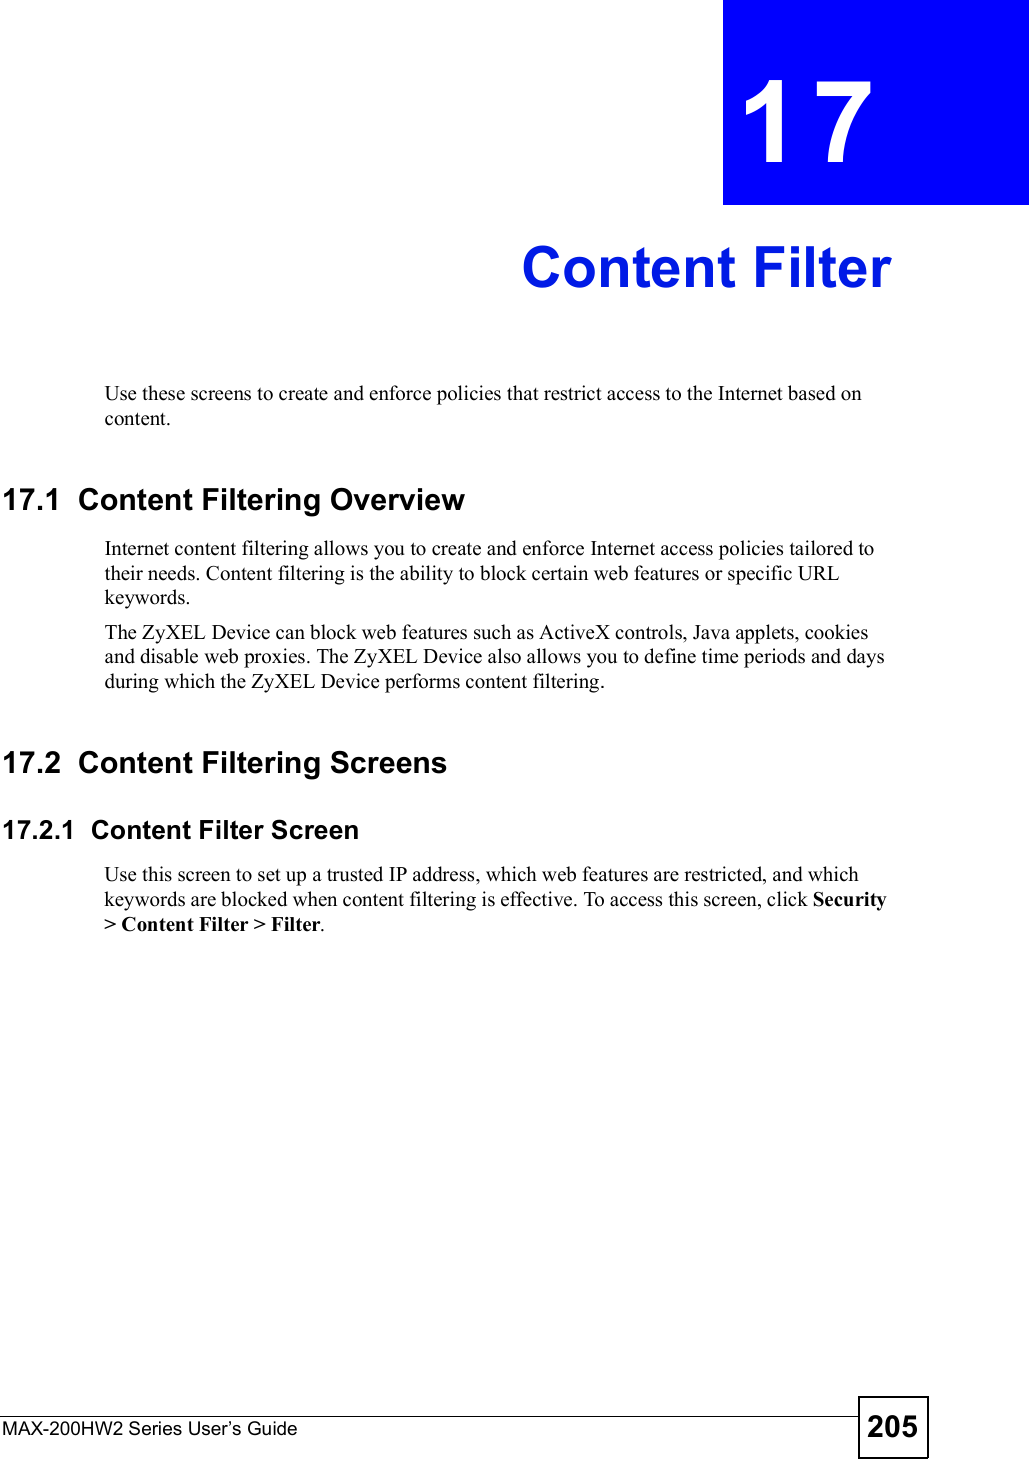 MAX-200HW2 Series User s Guide 205CHAPTER 17Content FilterUse these screens to create and enforce policies that restrict access to the Internet based on content.17.1  Content Filtering OverviewInternet content filtering allows you to create and enforce Internet access policies tailored to their needs. Content filtering is the ability to block certain web features or specific URL keywords.The ZyXEL Device can block web features such as ActiveX controls, Java applets, cookies and disable web proxies. The ZyXEL Device also allows you to define time periods and days during which the ZyXEL Device performs content filtering.17.2  Content Filtering Screens17.2.1  Content Filter ScreenUse this screen to set up a trusted IP address, which web features are restricted, and which keywords are blocked when content filtering is effective. To access this screen, click Security &gt; Content Filter &gt; Filter.